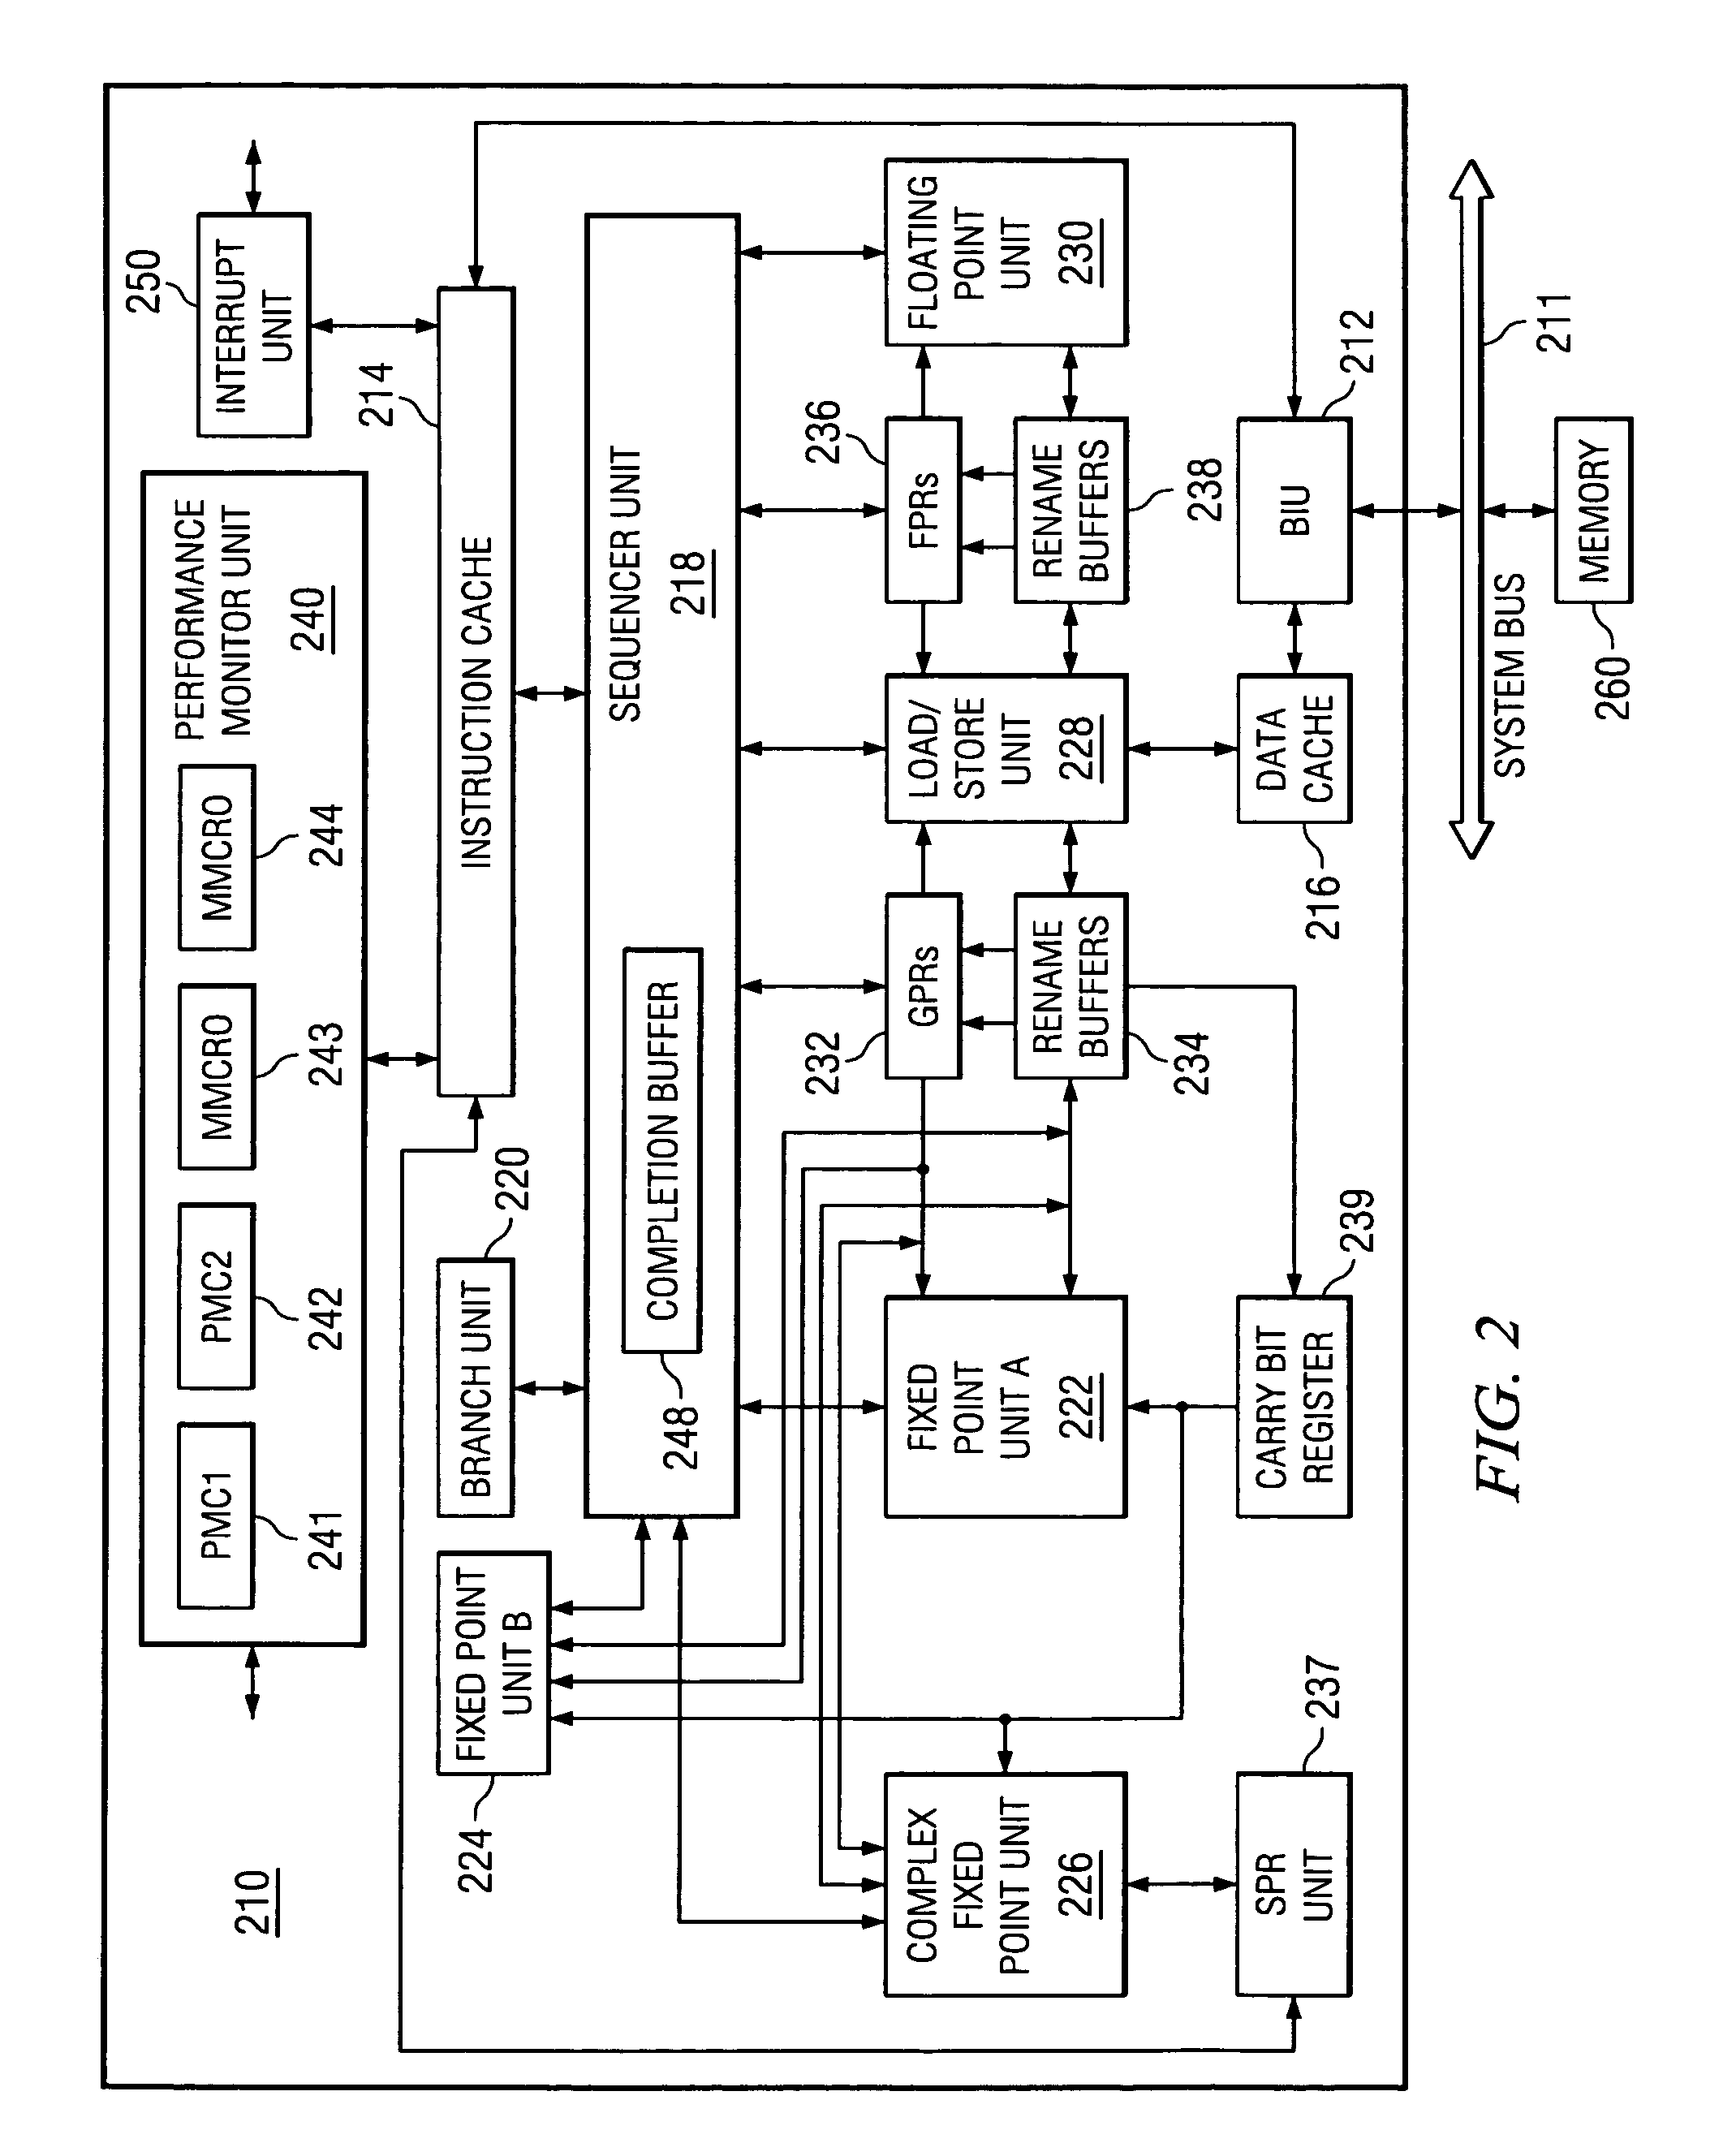 Method and apparatus for autonomic detection of cache "chase tail" conditions and storage of instructions/data in "chase tail" data structure